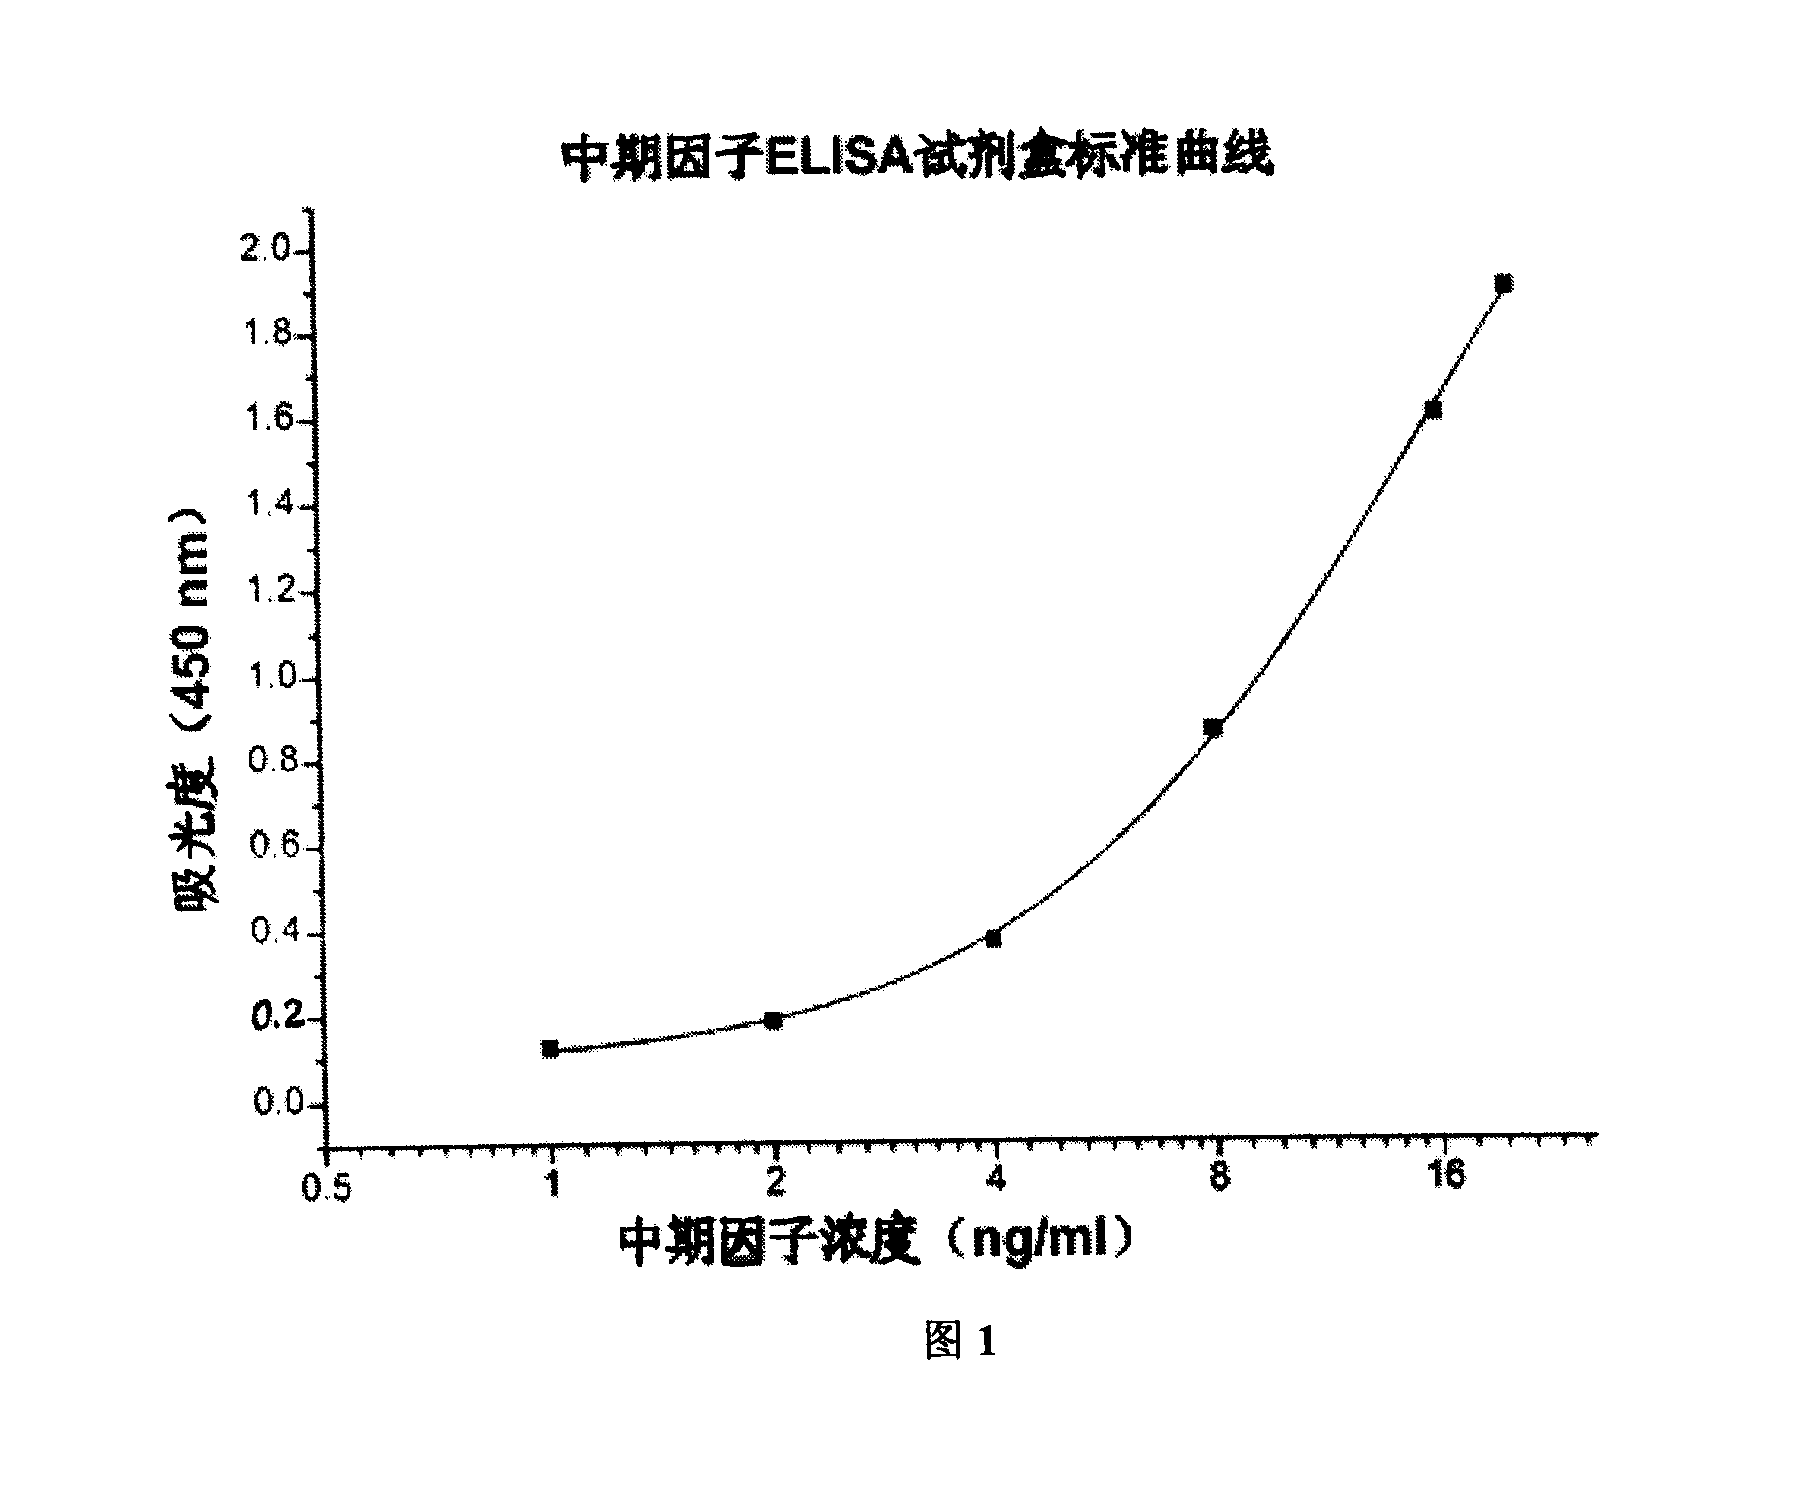 ELISA reagent box for detecting metaphase factor concentration and method of use thereof